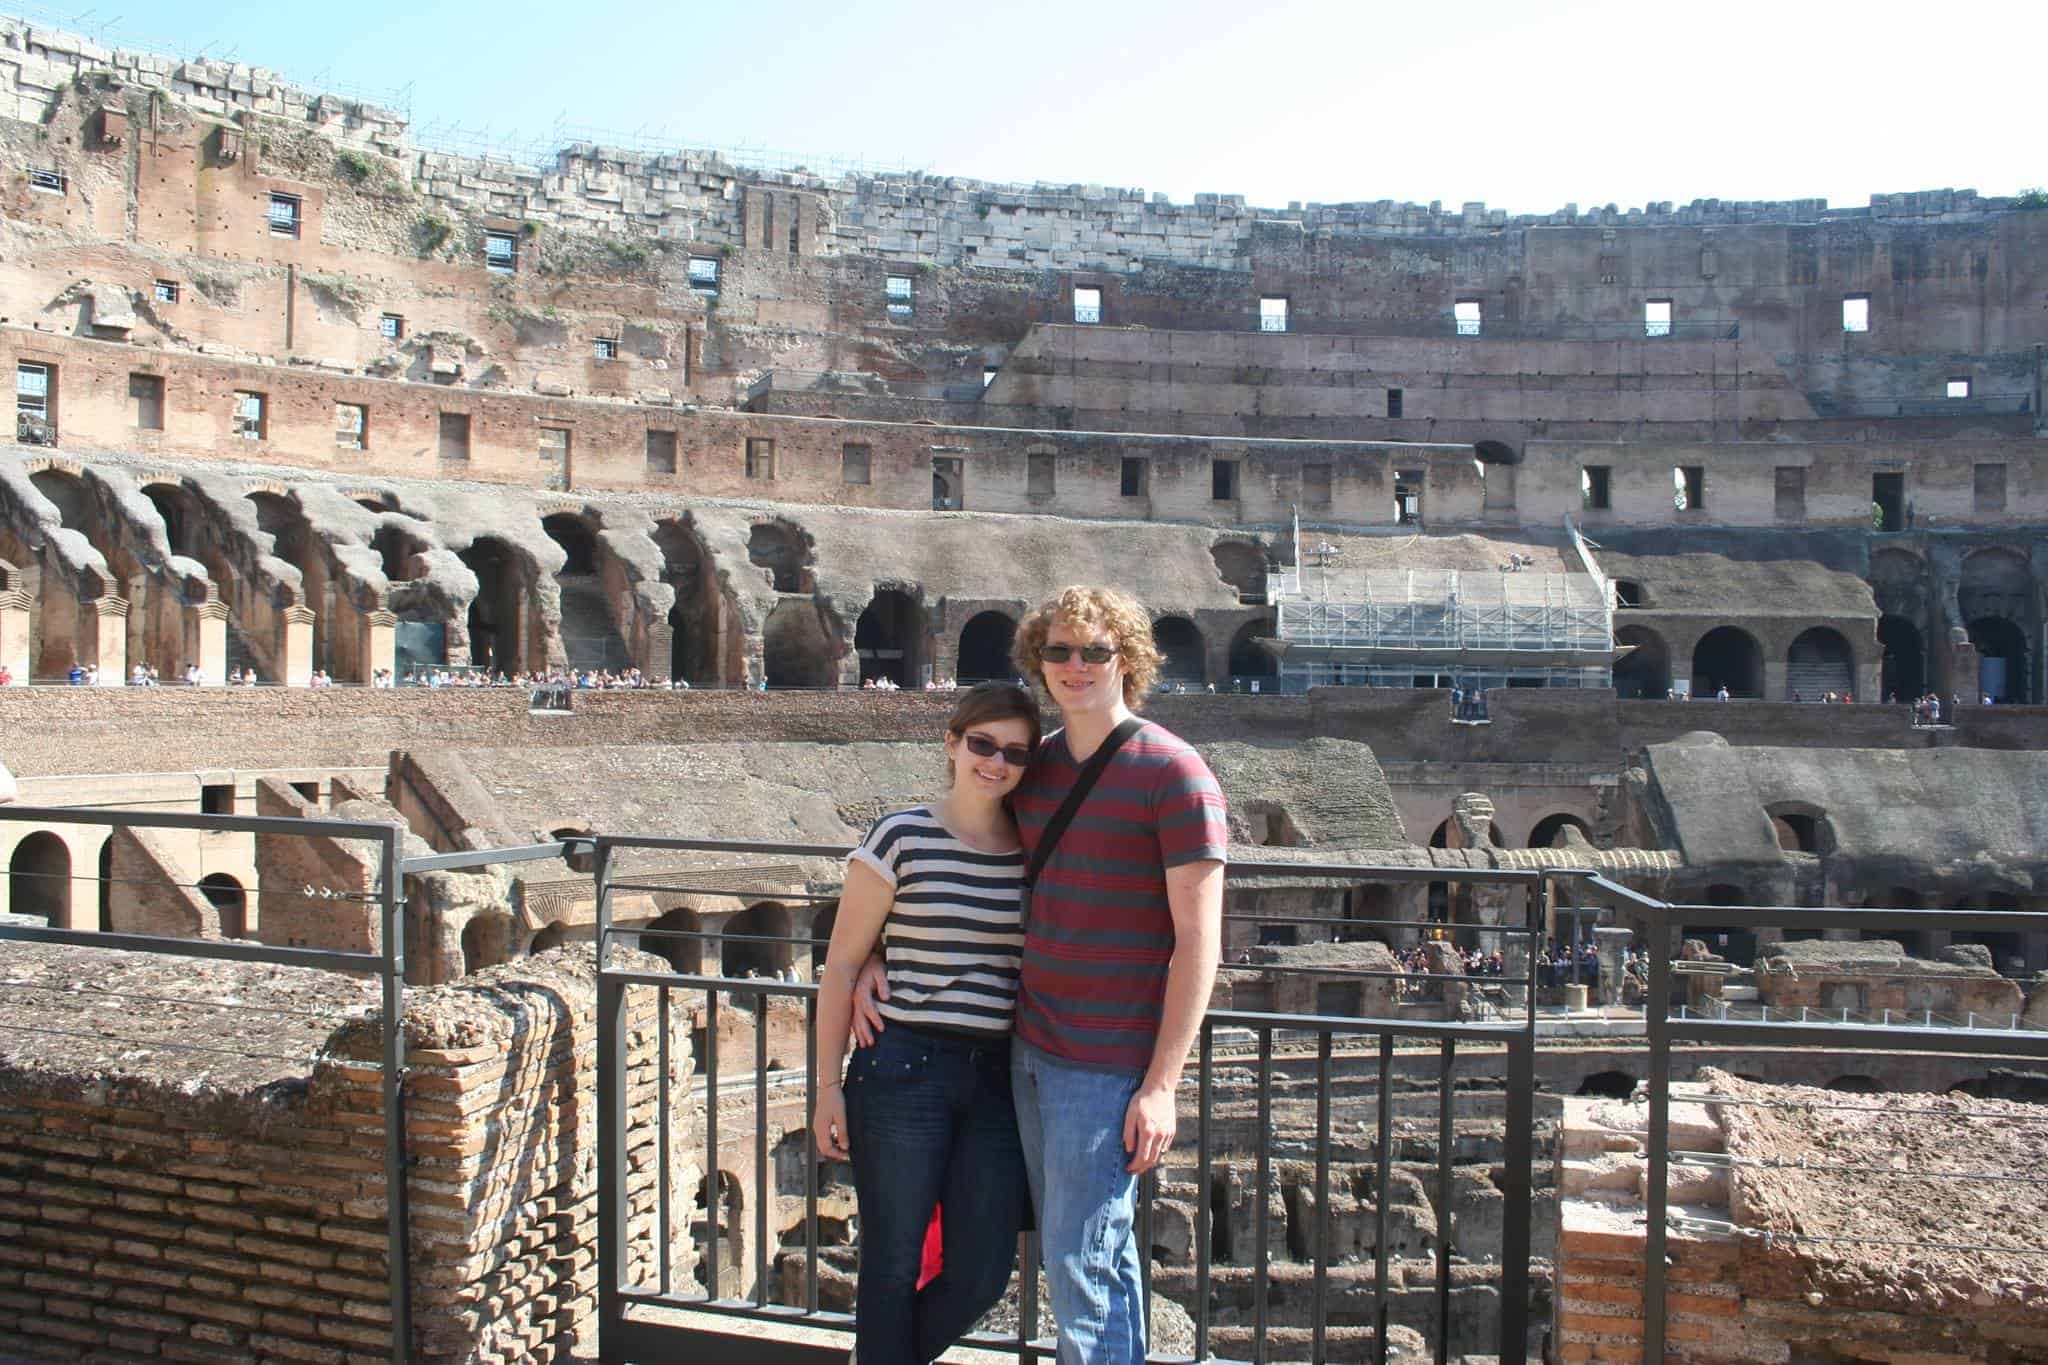 Derek and Kacie at the Colosseum in Rome, Italy